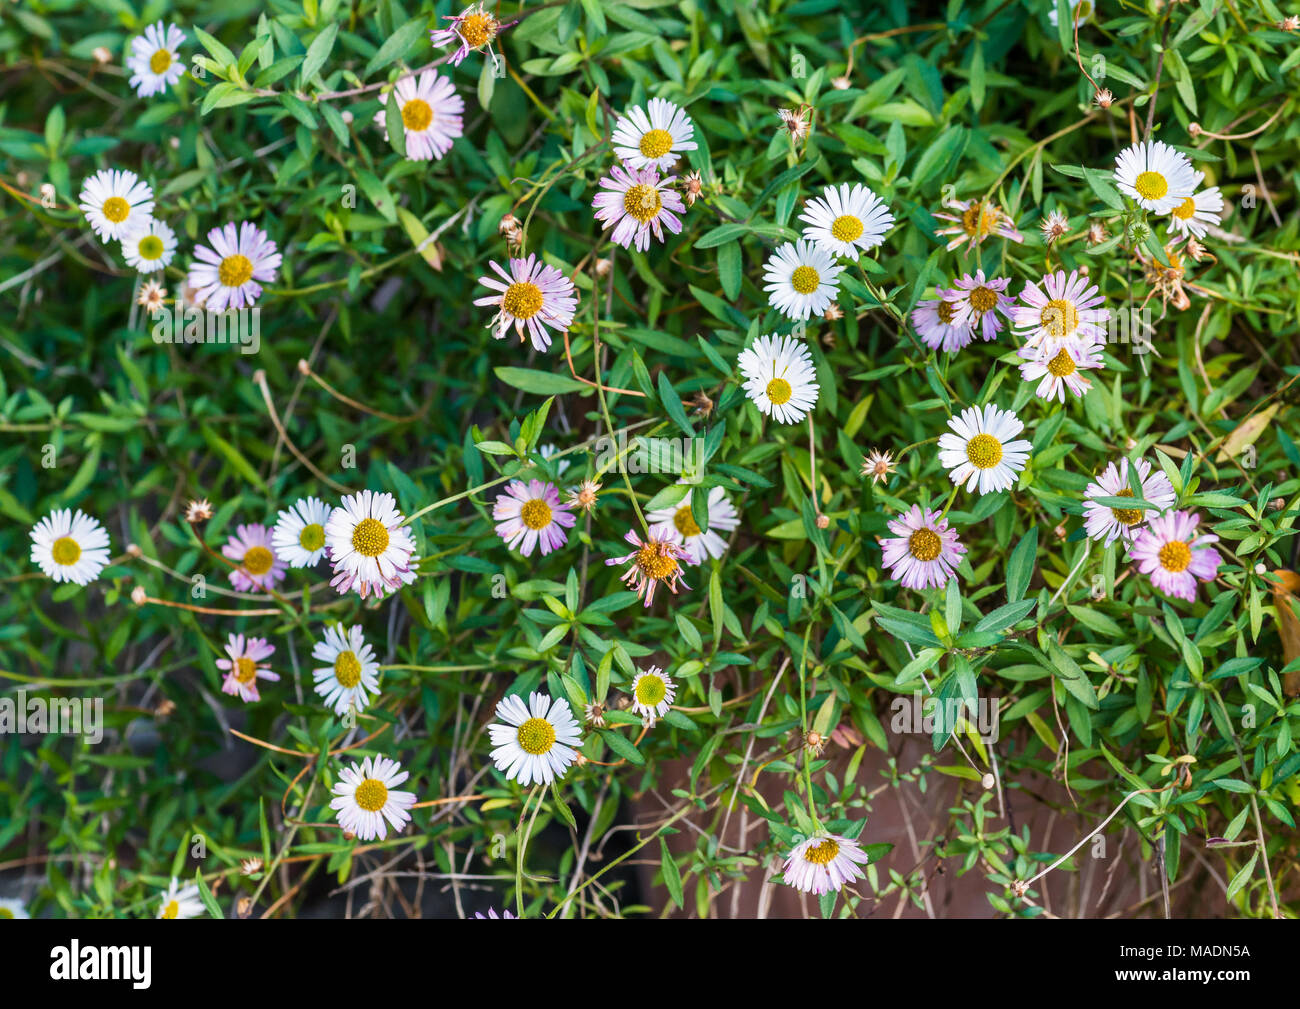 A shot of some erigeron stallone blooms. Stock Photo